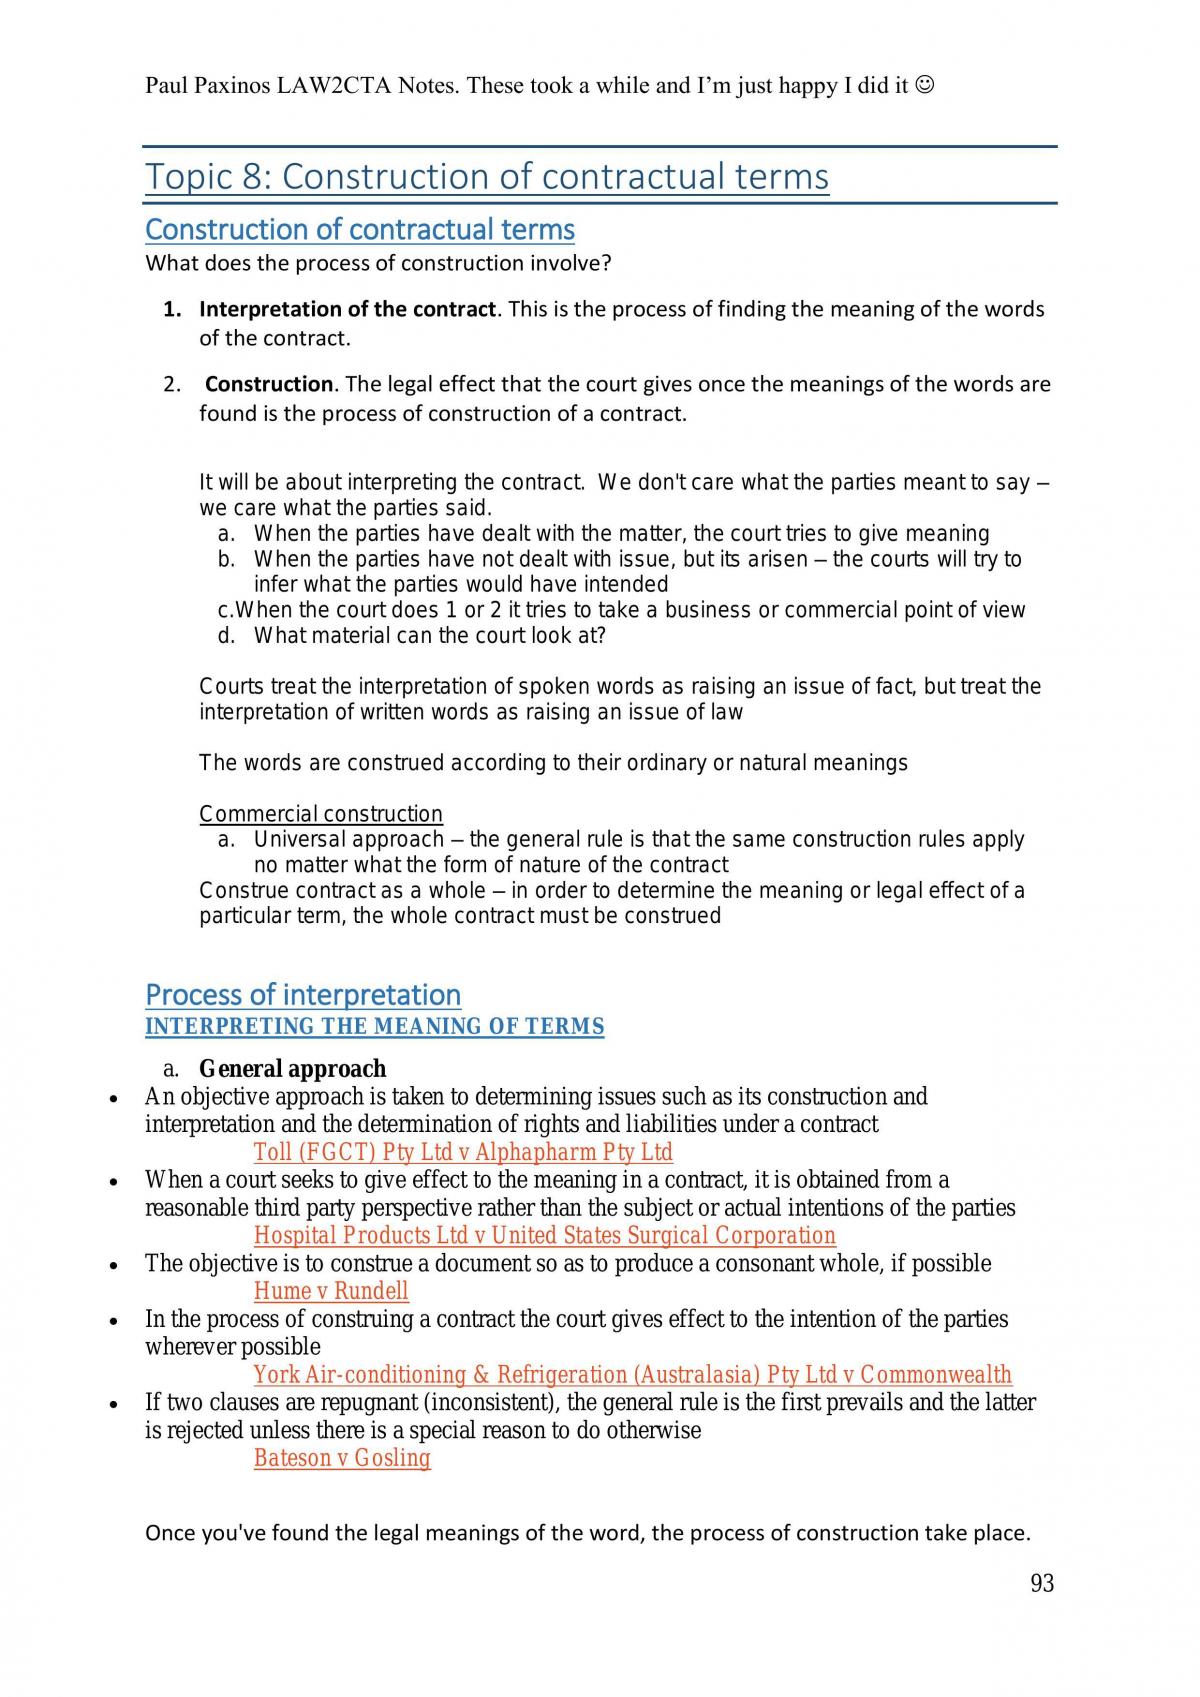 LAW2CTA Complete Notes - Page 93